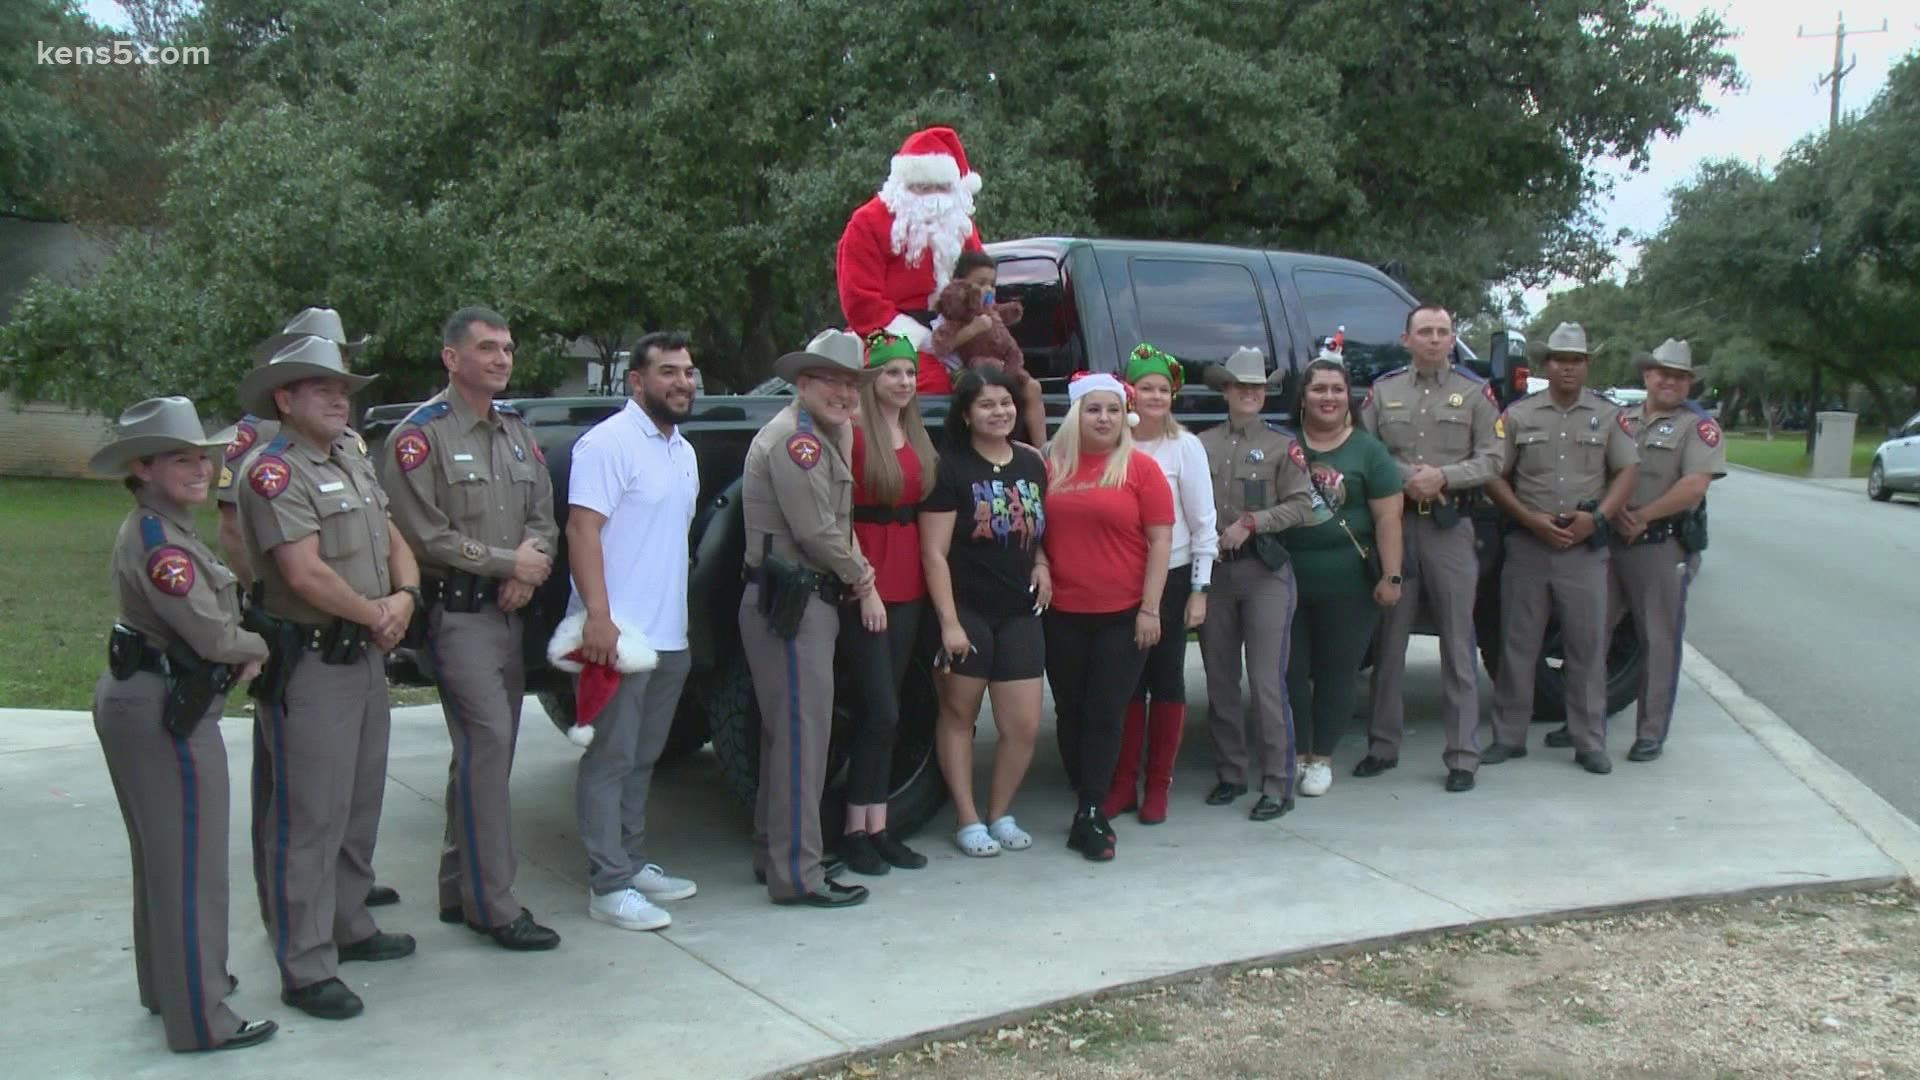 Mothers Against Drunk Driving in partnership with the Texas Department of Public Safety surprised San Antonio families with Christmas gifts Thursday.